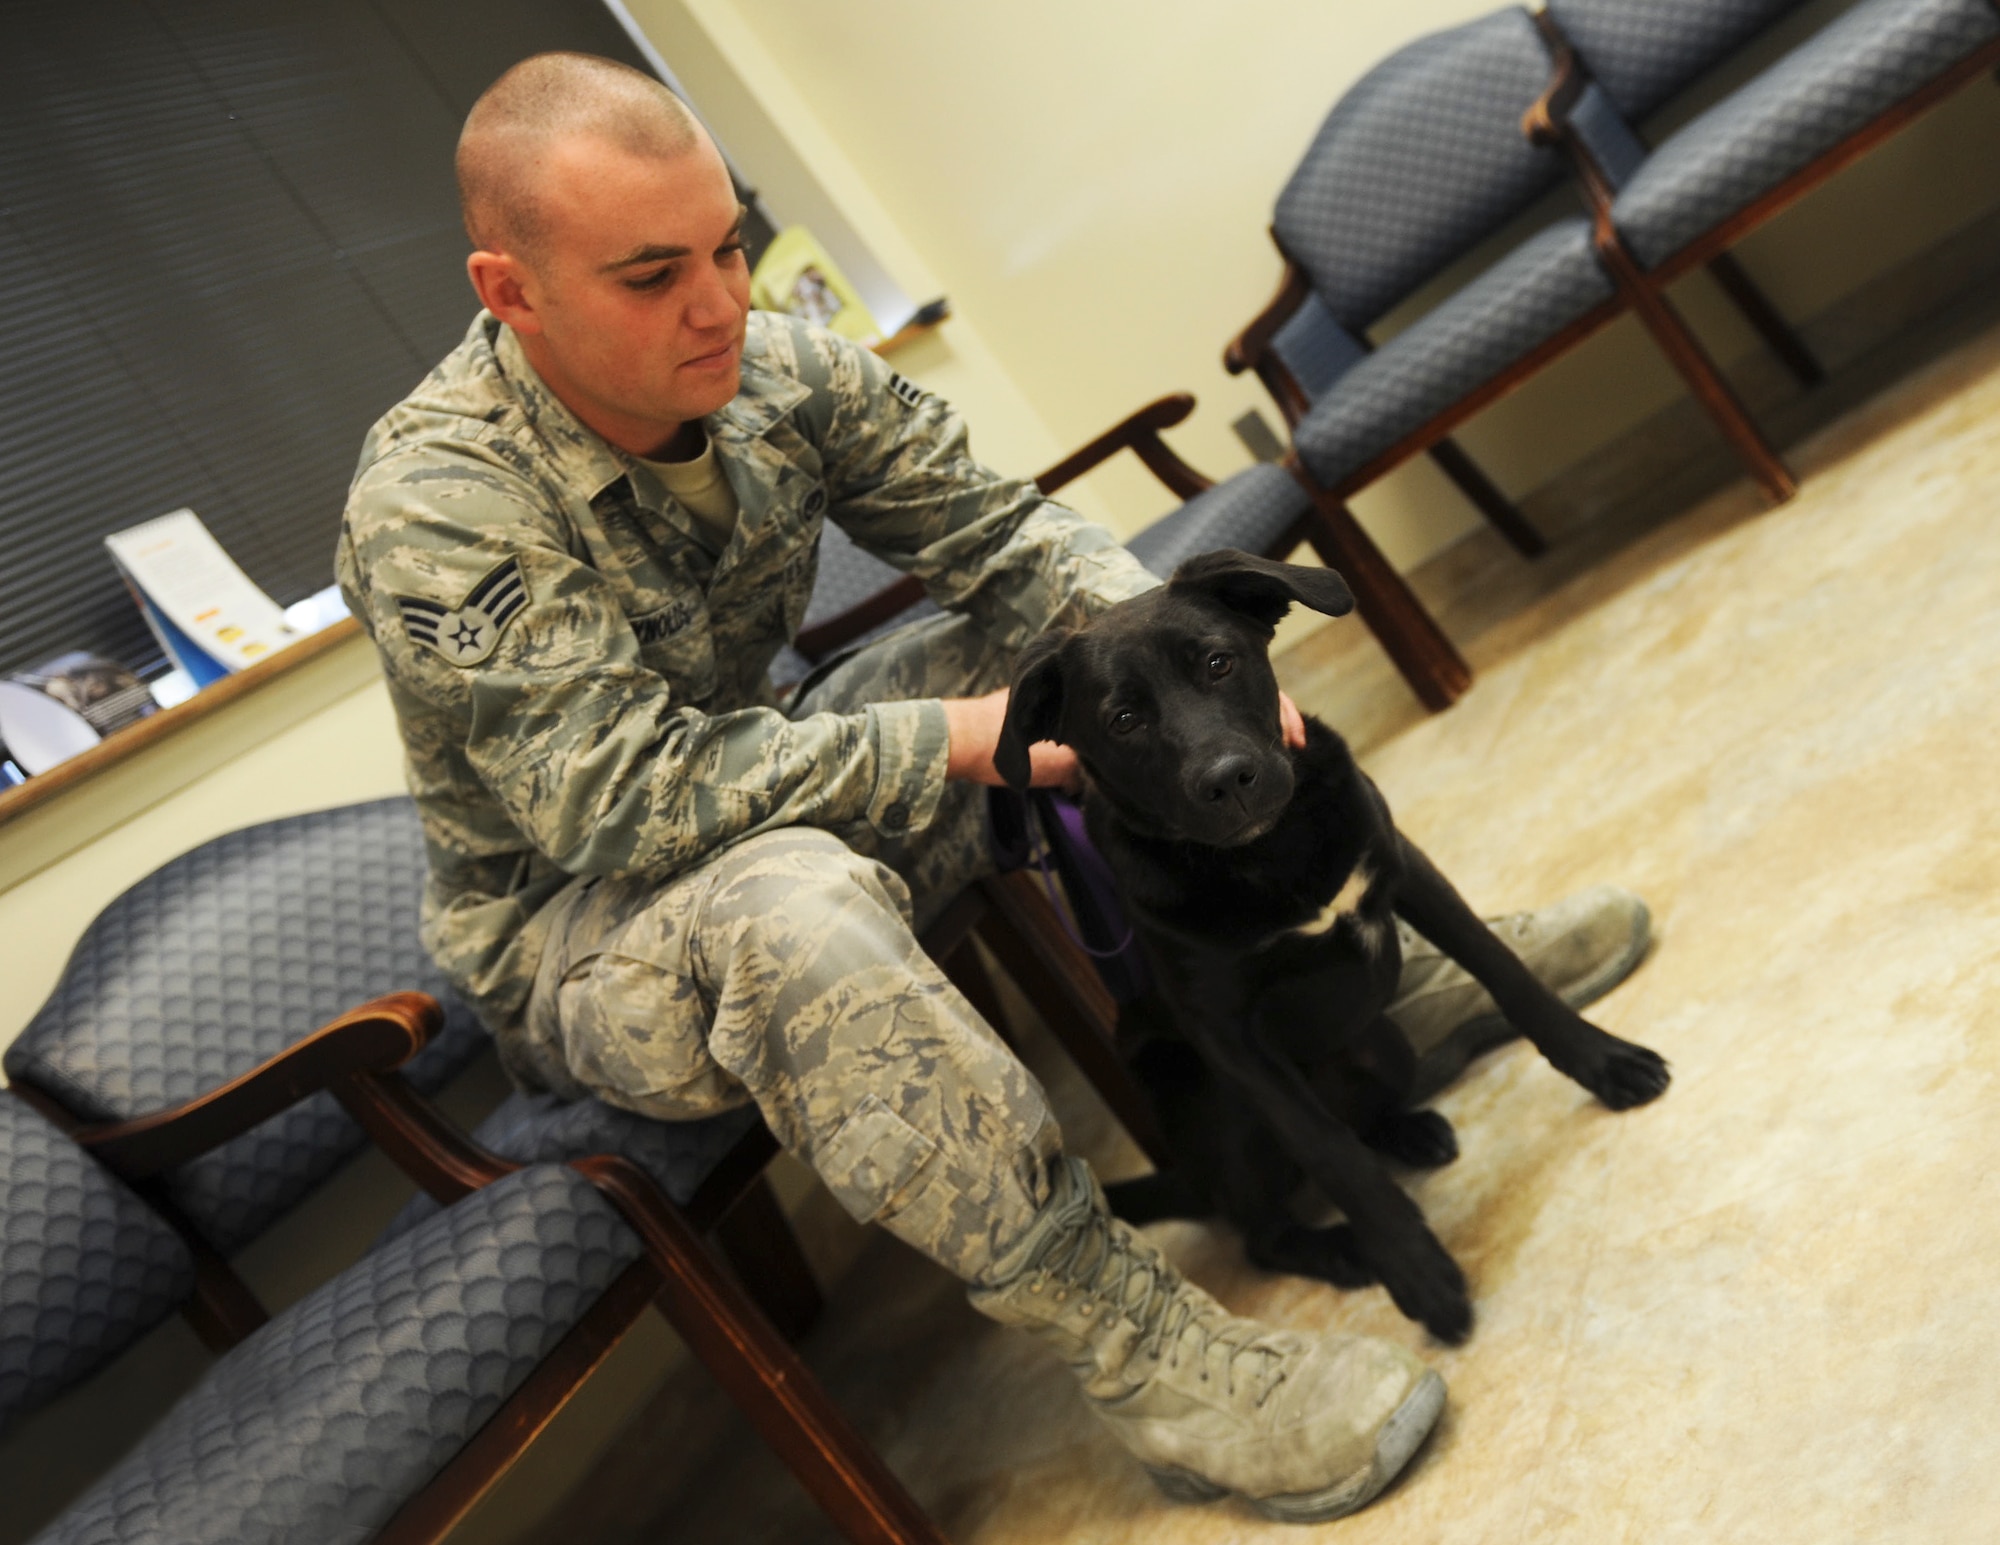 U.S. Air Force Senior Airman Matthew Reynolds, 23d Civil Engineer Squadron structural journeyman, and his dog, Dakota, sit in the Veterinary Treatment Facility waiting room at Moody Air Force Base, Ga., March 12, 2013. This was Dakota’s first visit to the veterinarian since being adopted by Reynolds. (U.S. Air Force photo by Airman 1st Class Olivia Bumpers/Released)